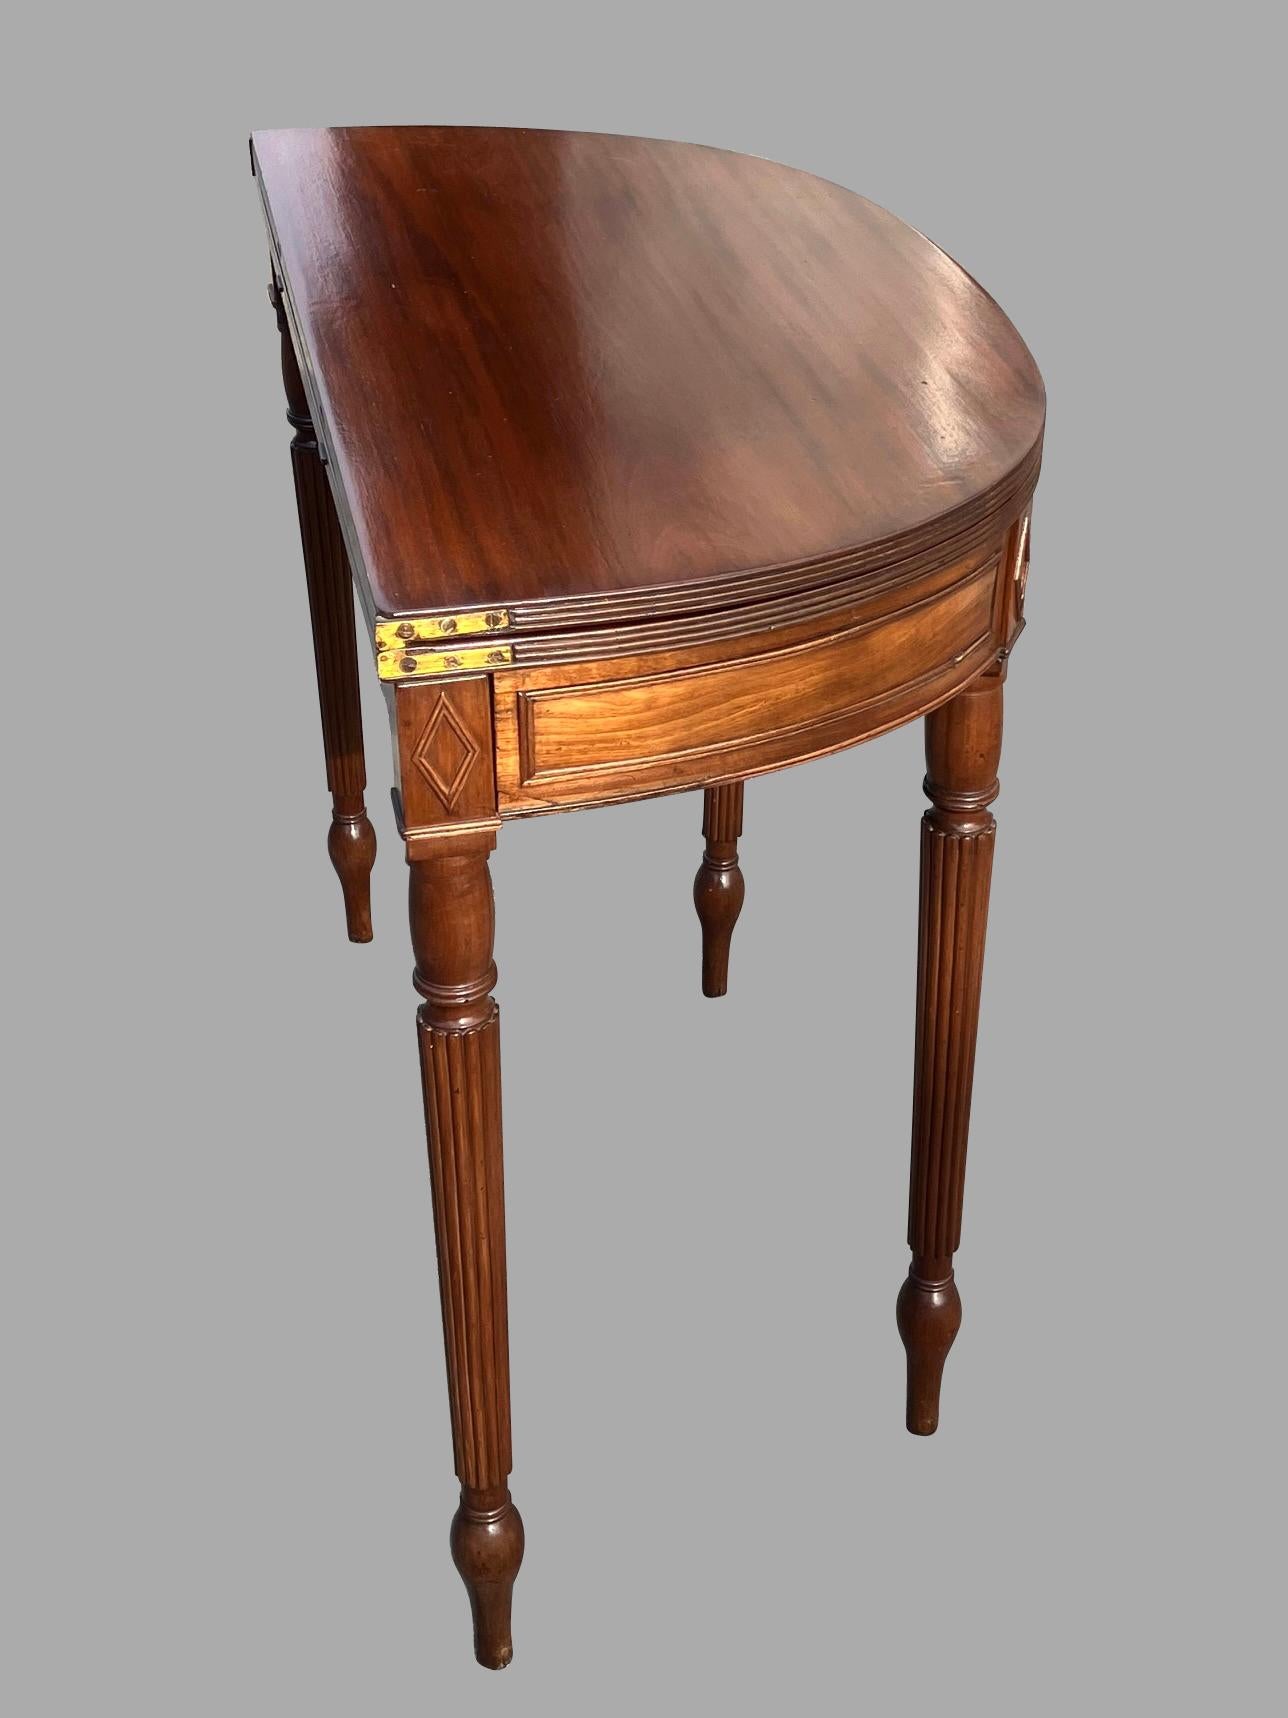 19th Century English Regency Period Mahogany Flip Top Game or Tea Table with Reeded Legs For Sale